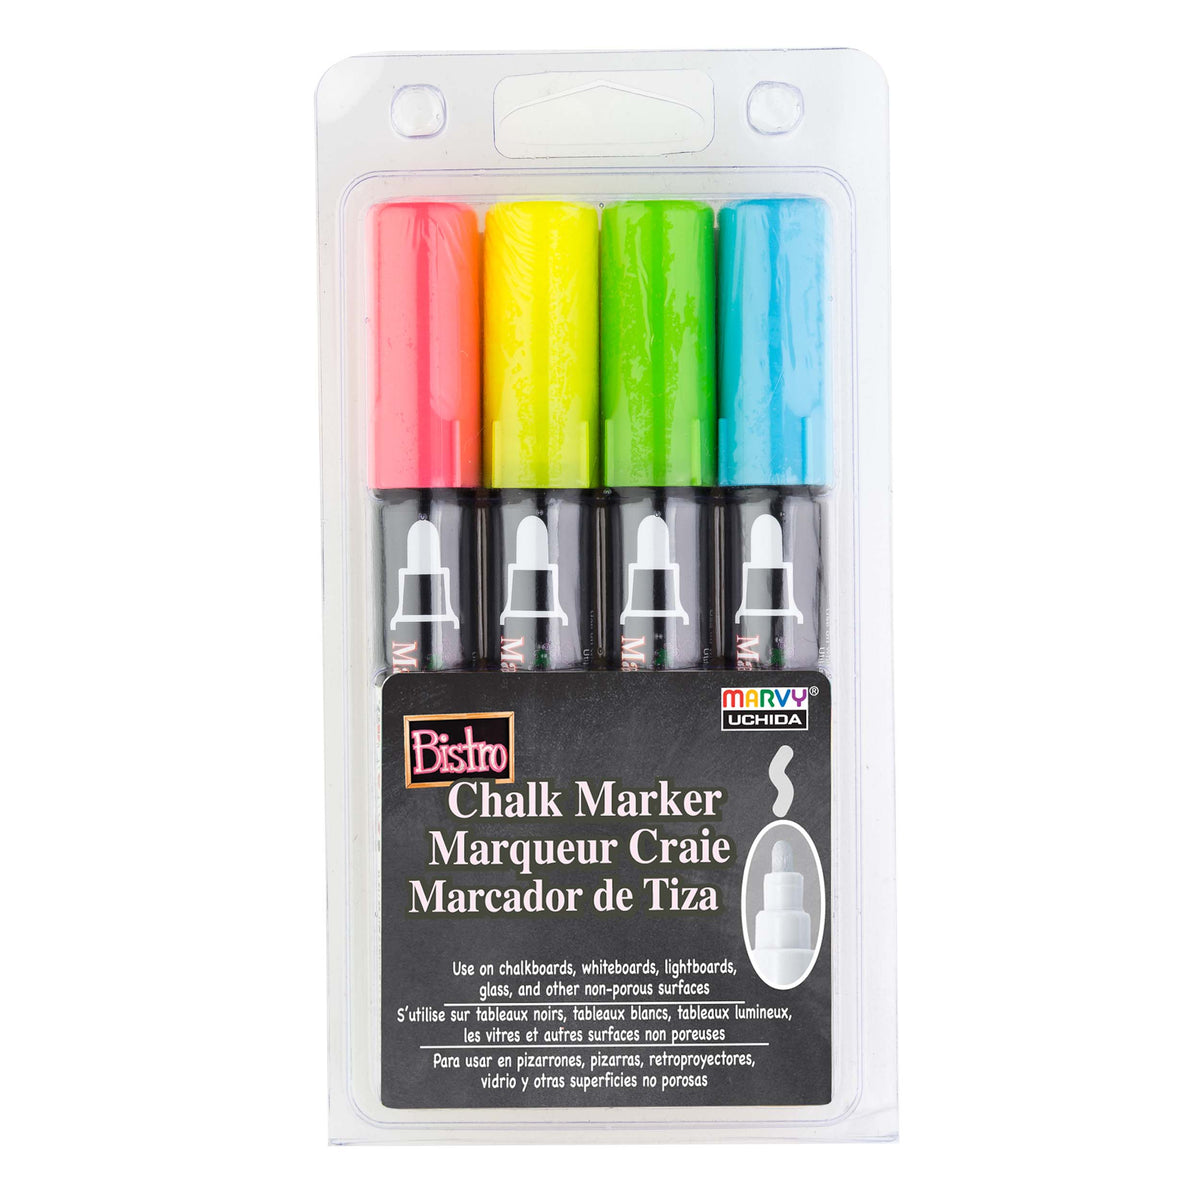 Chalk Markers for Chalk boards, glass and dry erase boards